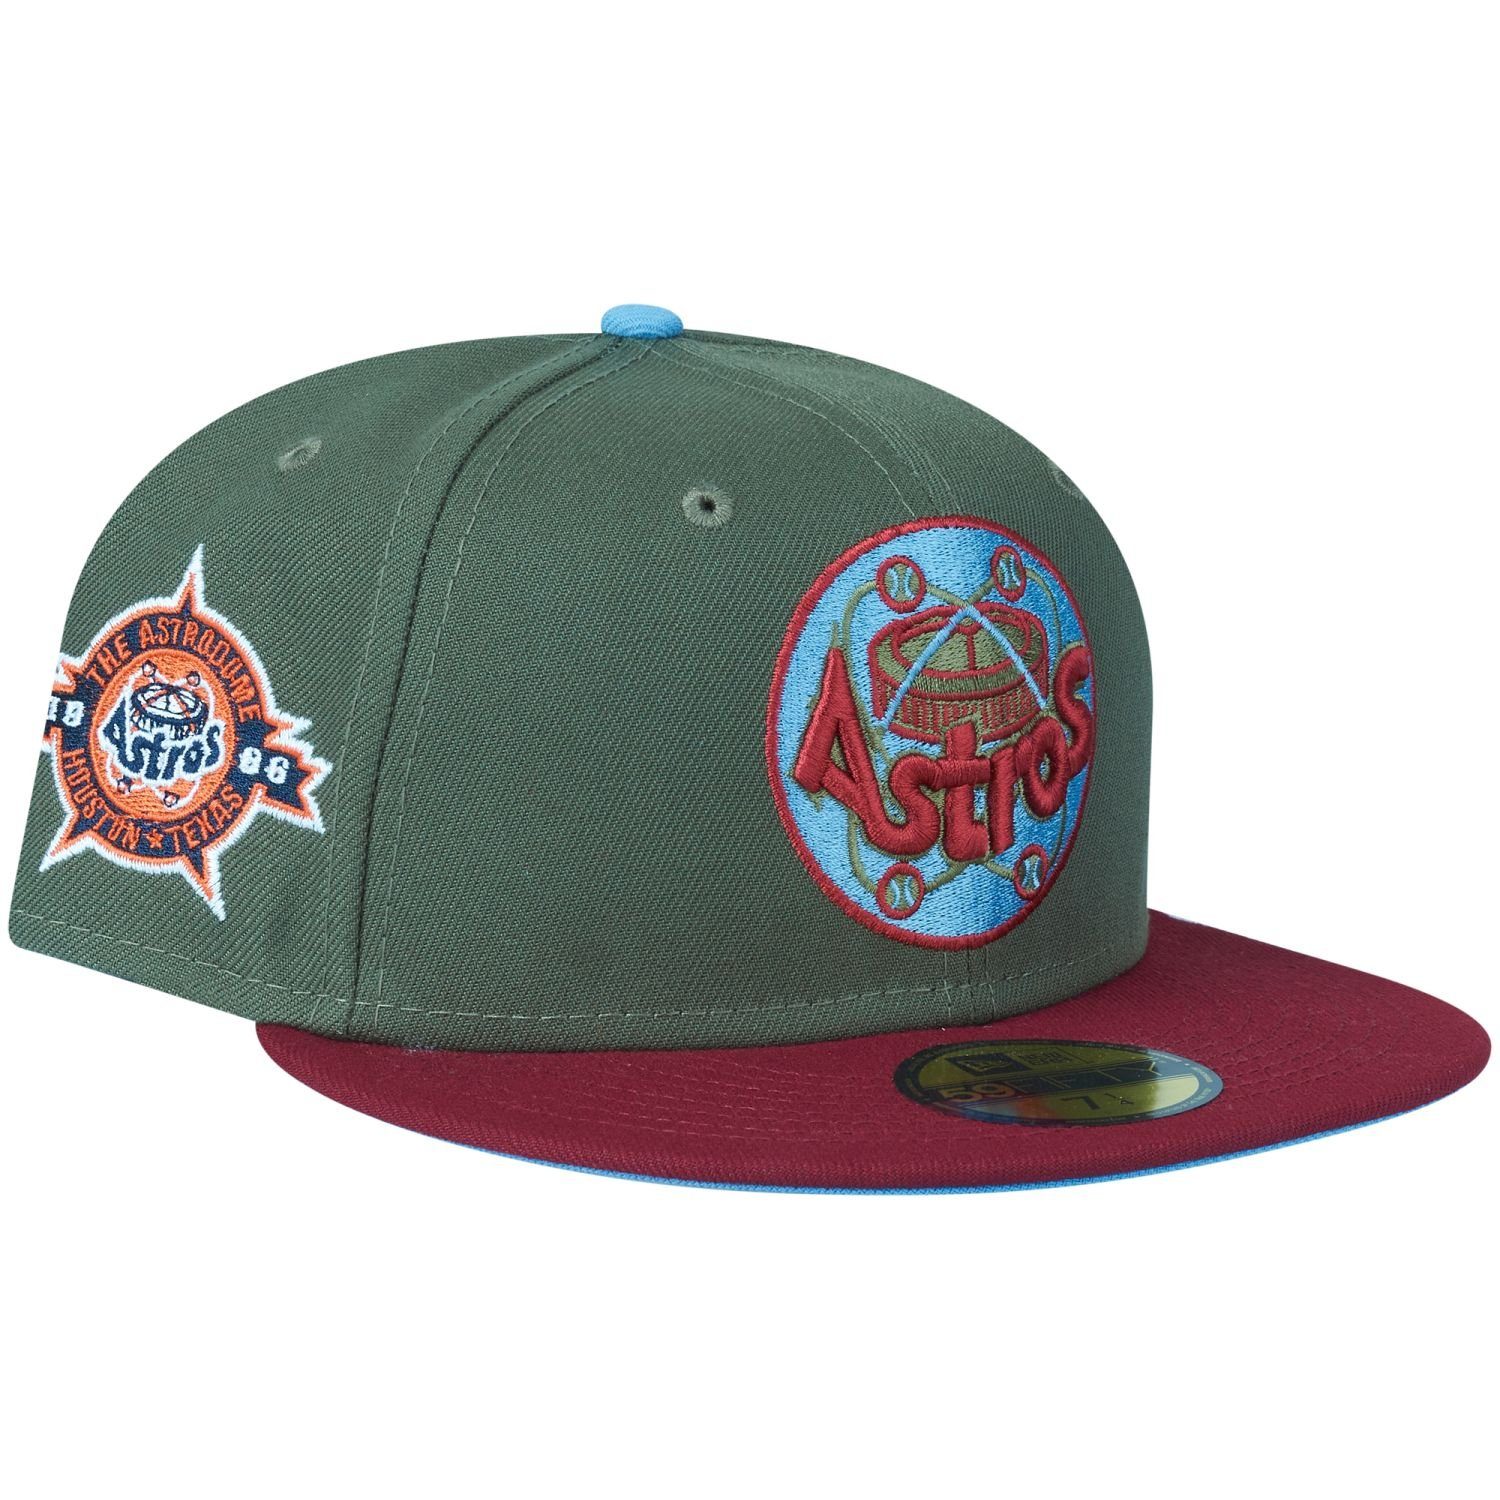 New Era Fitted Cap 59Fifty ASTRODOME Houston Astros